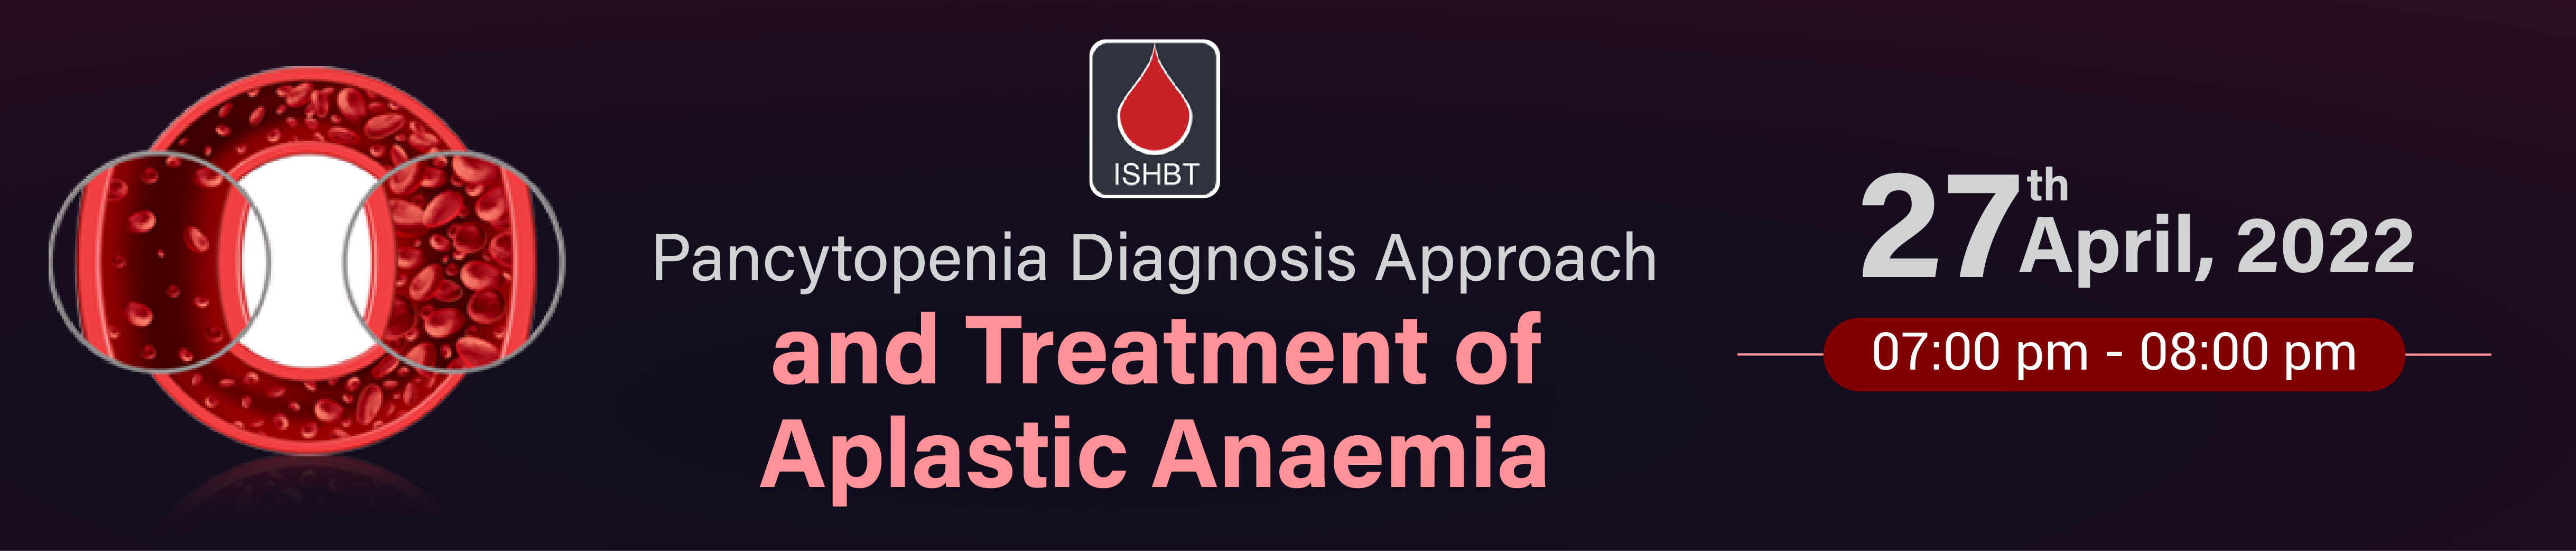 Pancytopenia Diagnosis Approach and Treatment of Aplastic Anaemia